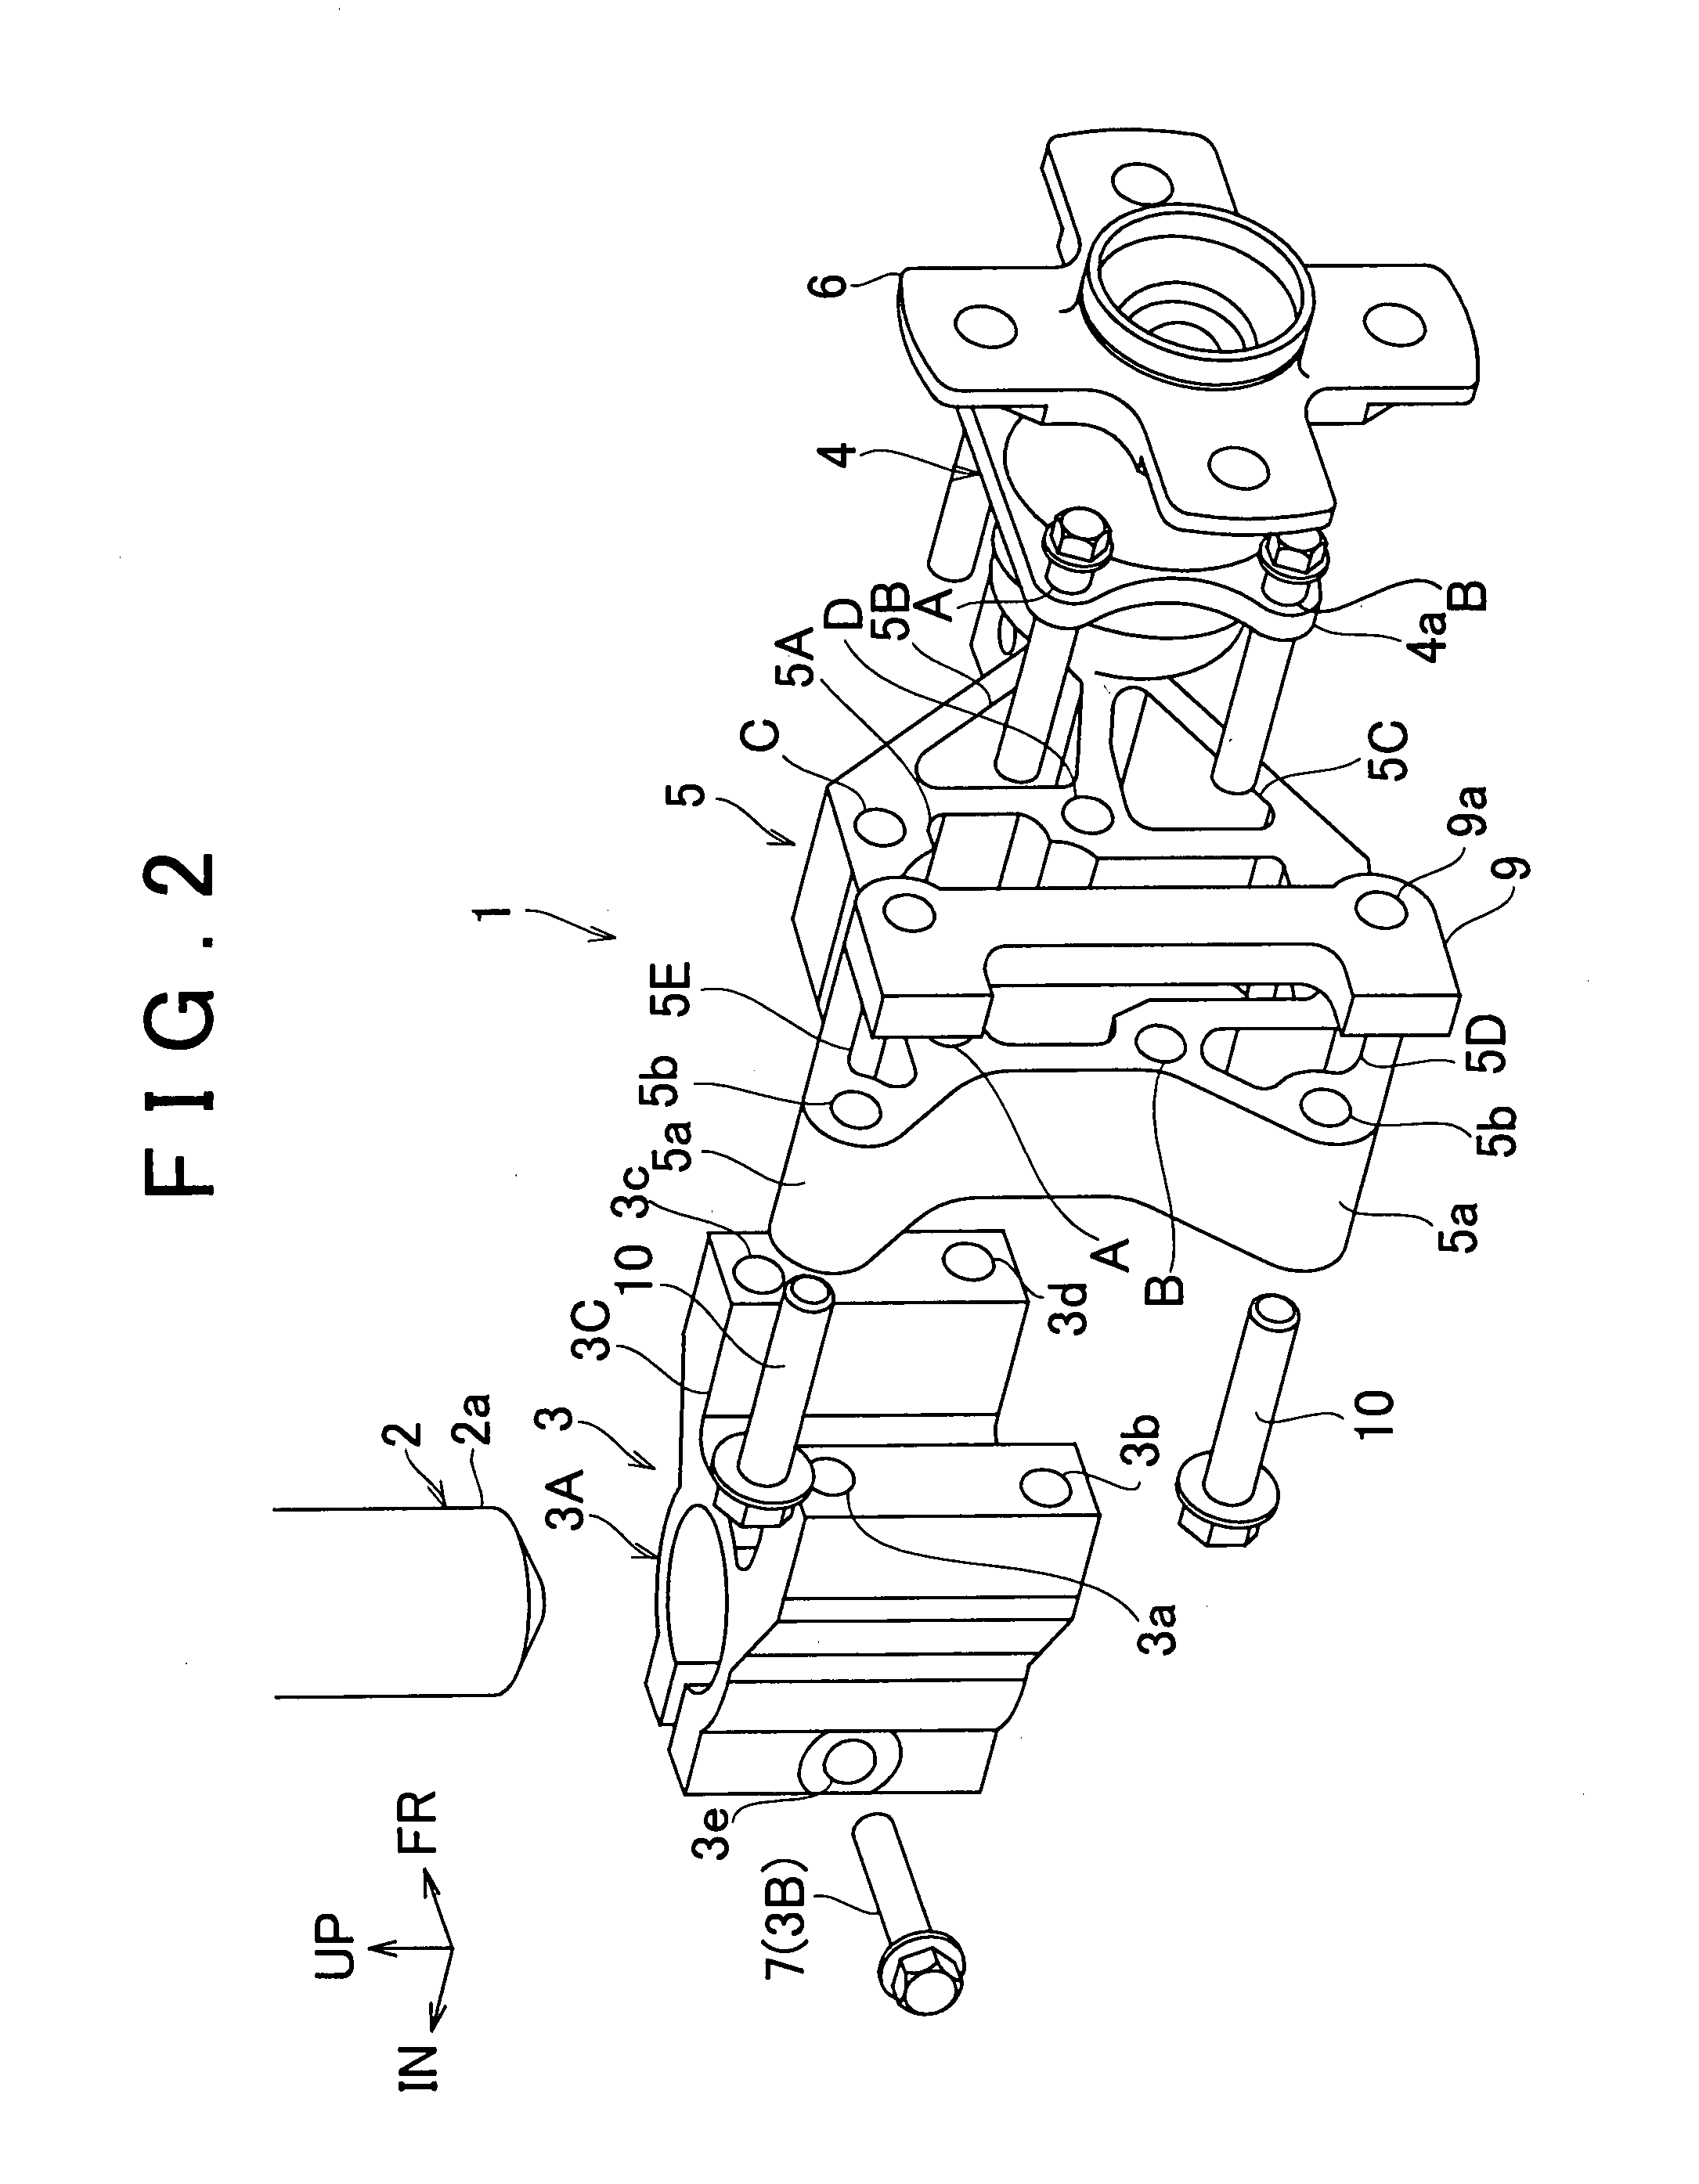 Knuckle and method of manufacturing knuckle